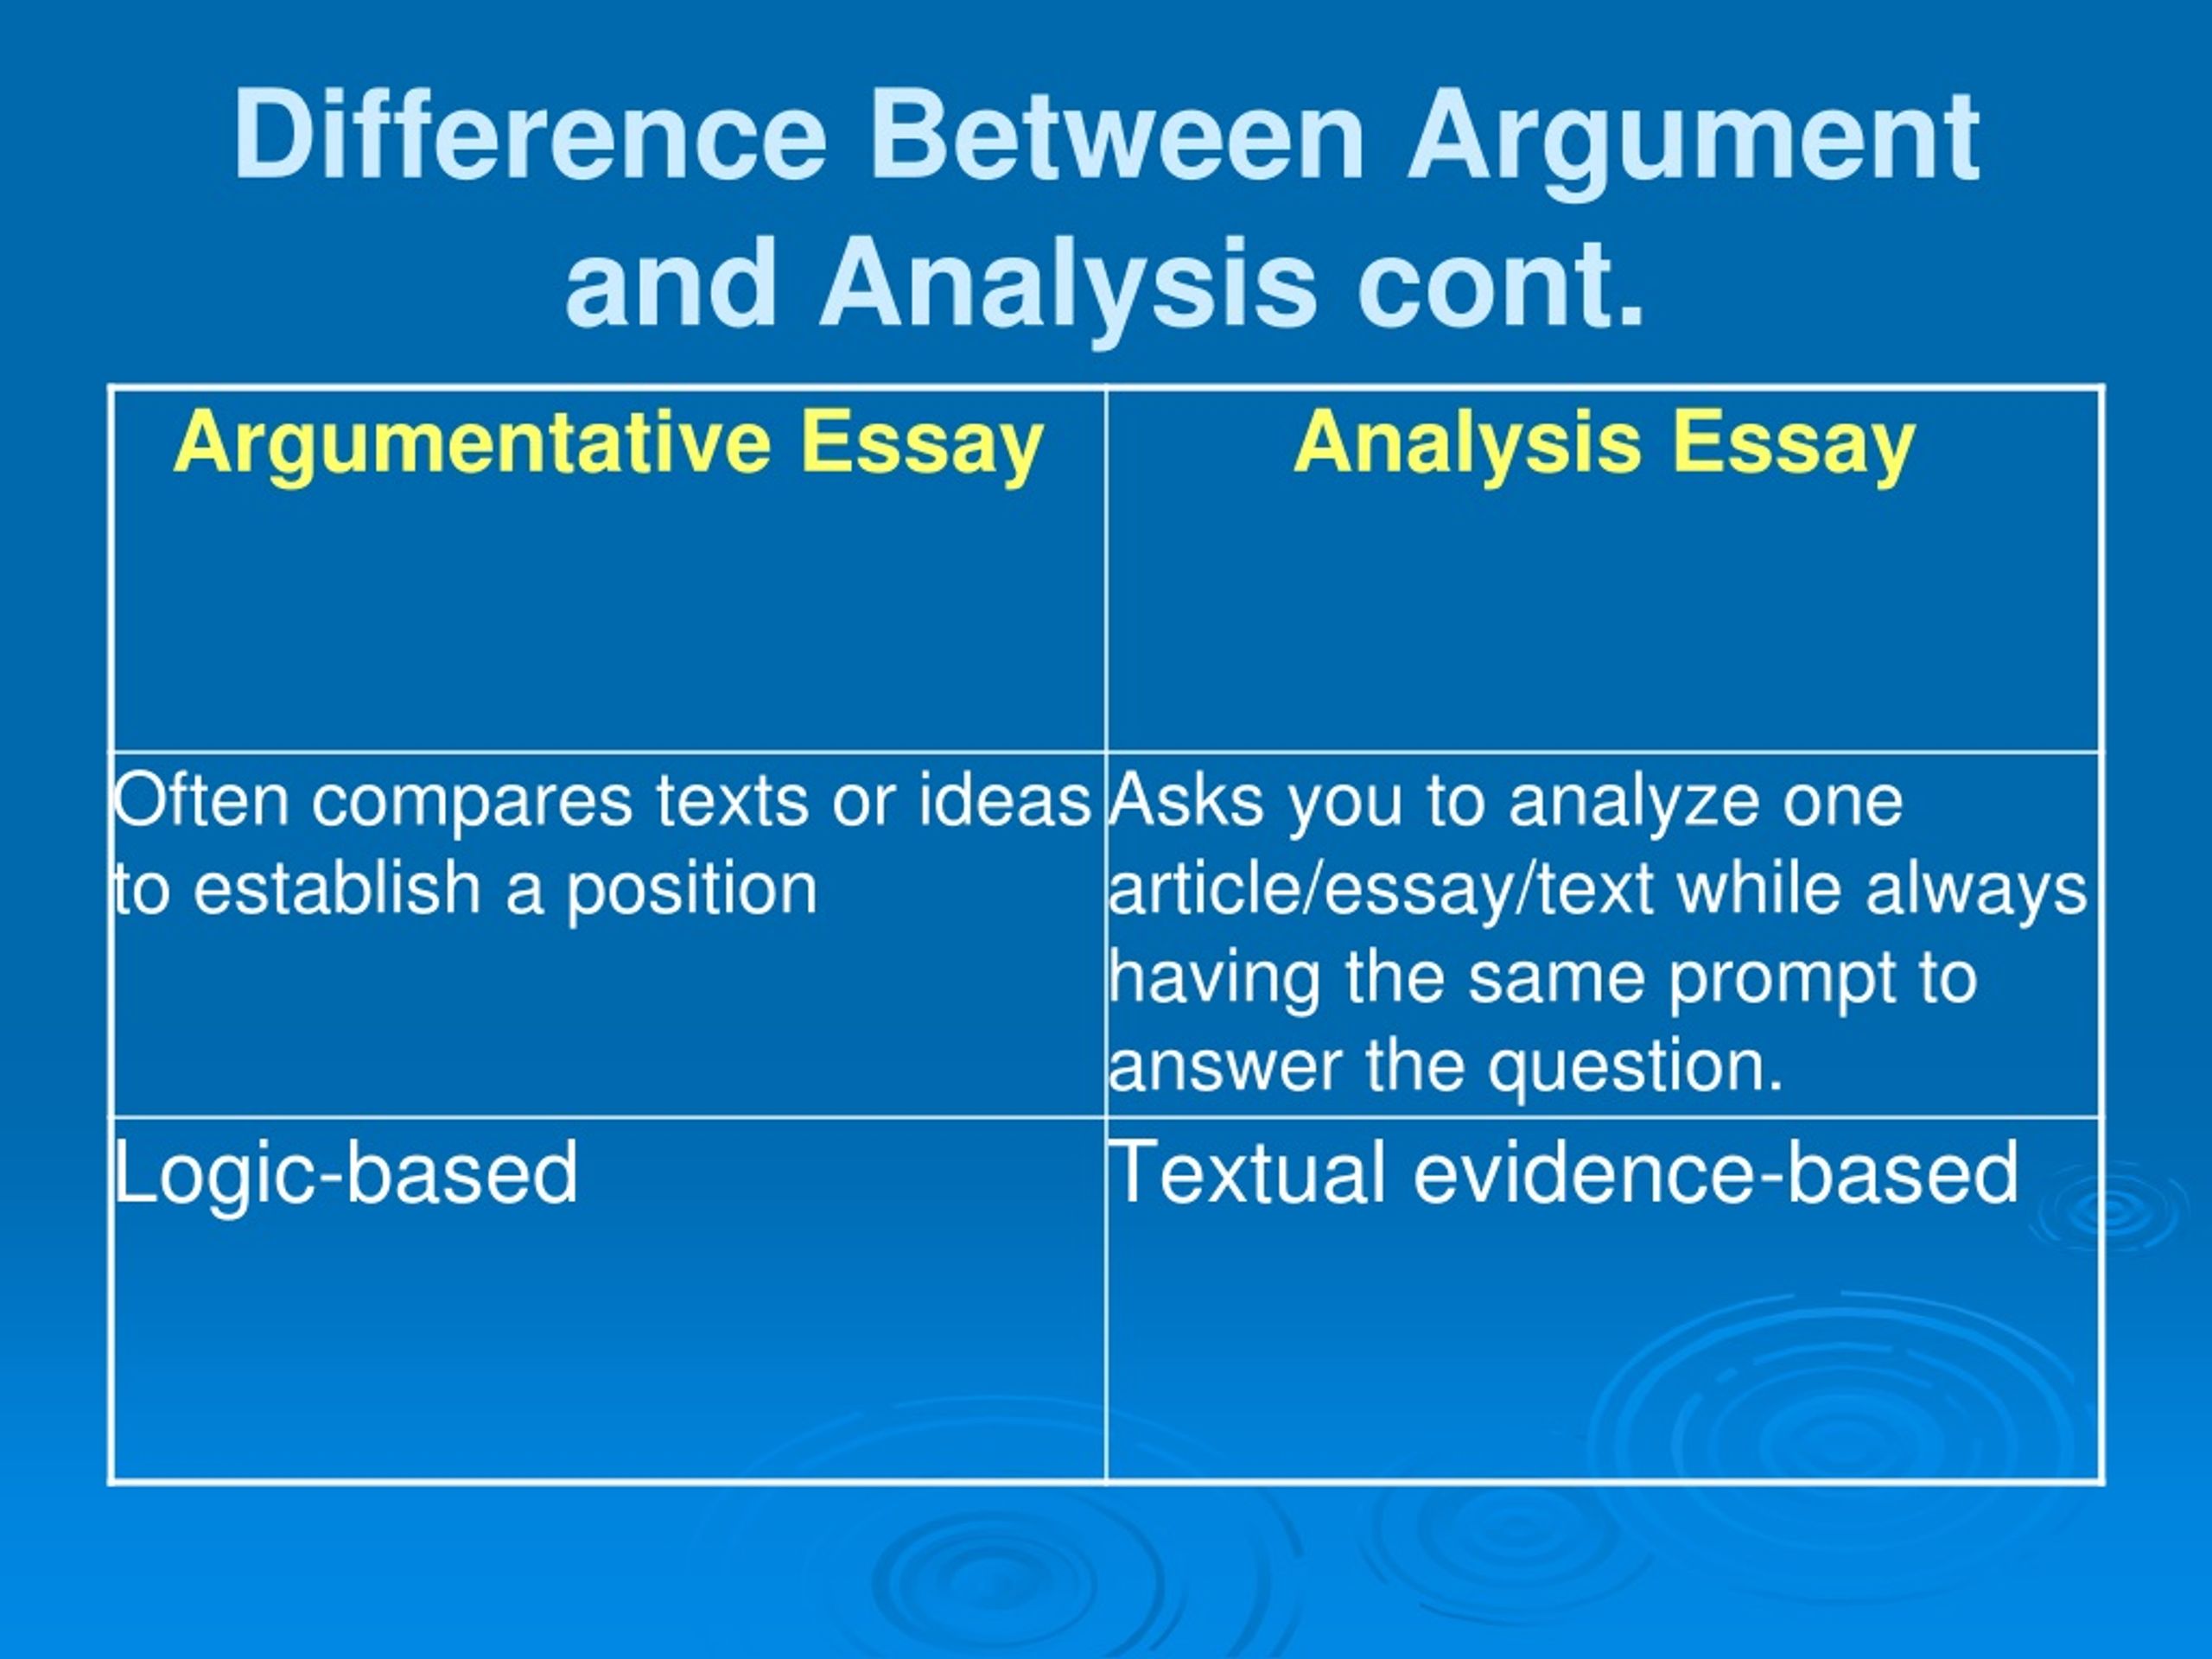 what is the difference between analytical and argumentative research paper